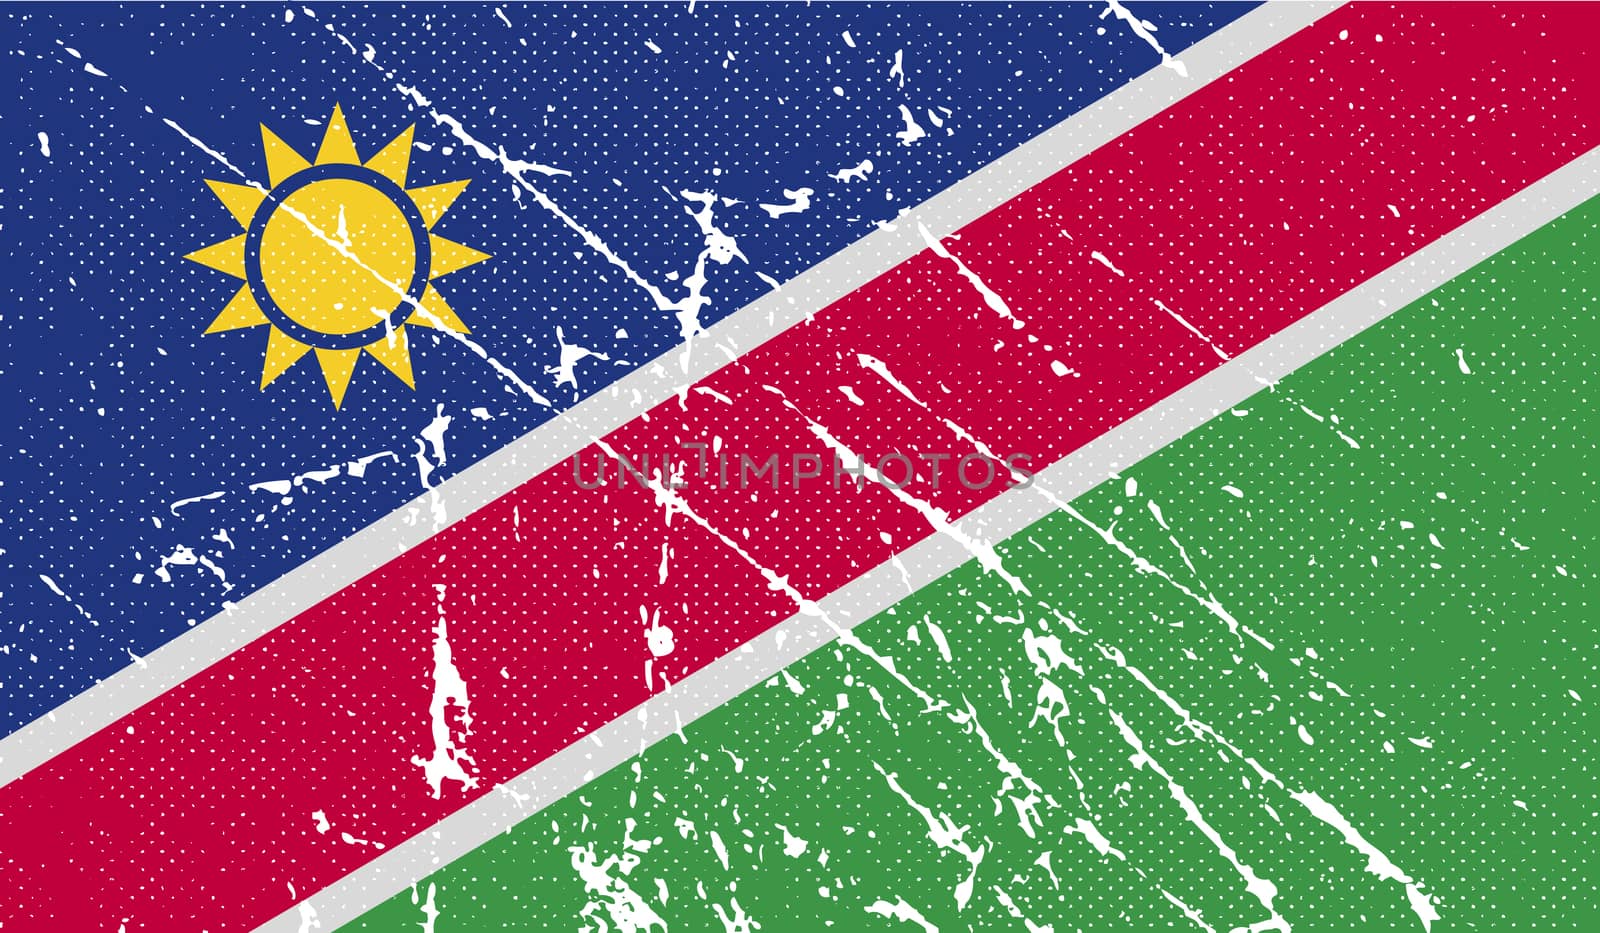 Flag of Namibia with old texture.  illustration